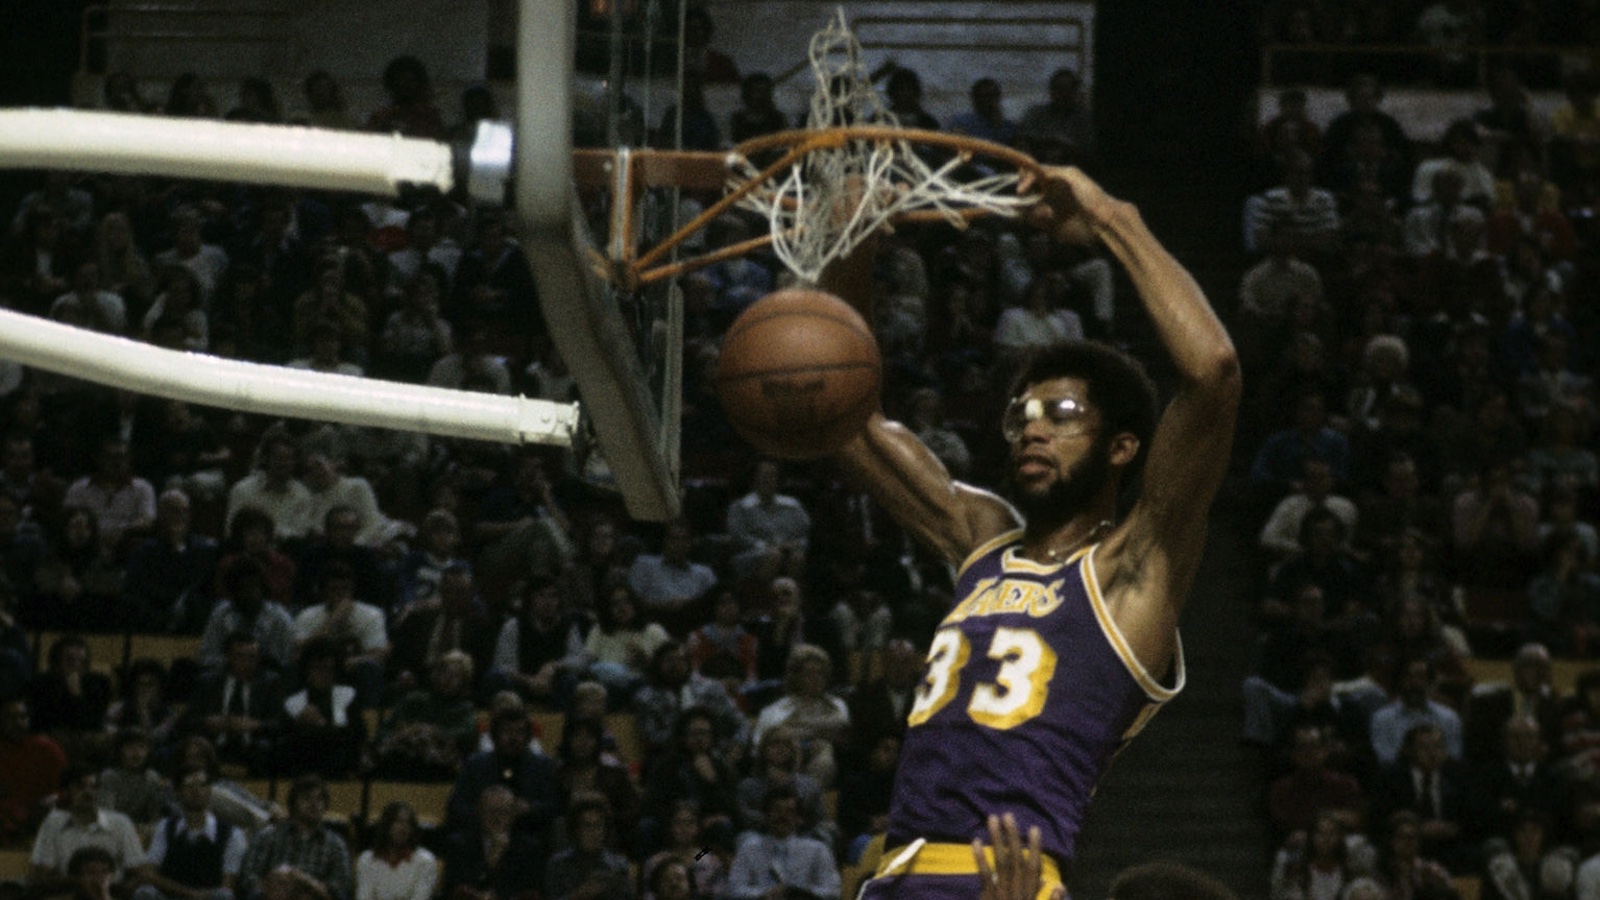 Justin Kubatko on X: 📅 On this day in 1975, the @Lakers Kareem Abdul- Jabbar had 29 points, 21 rebounds, and 11 blocks in a win over the Pistons.  Since the NBA started